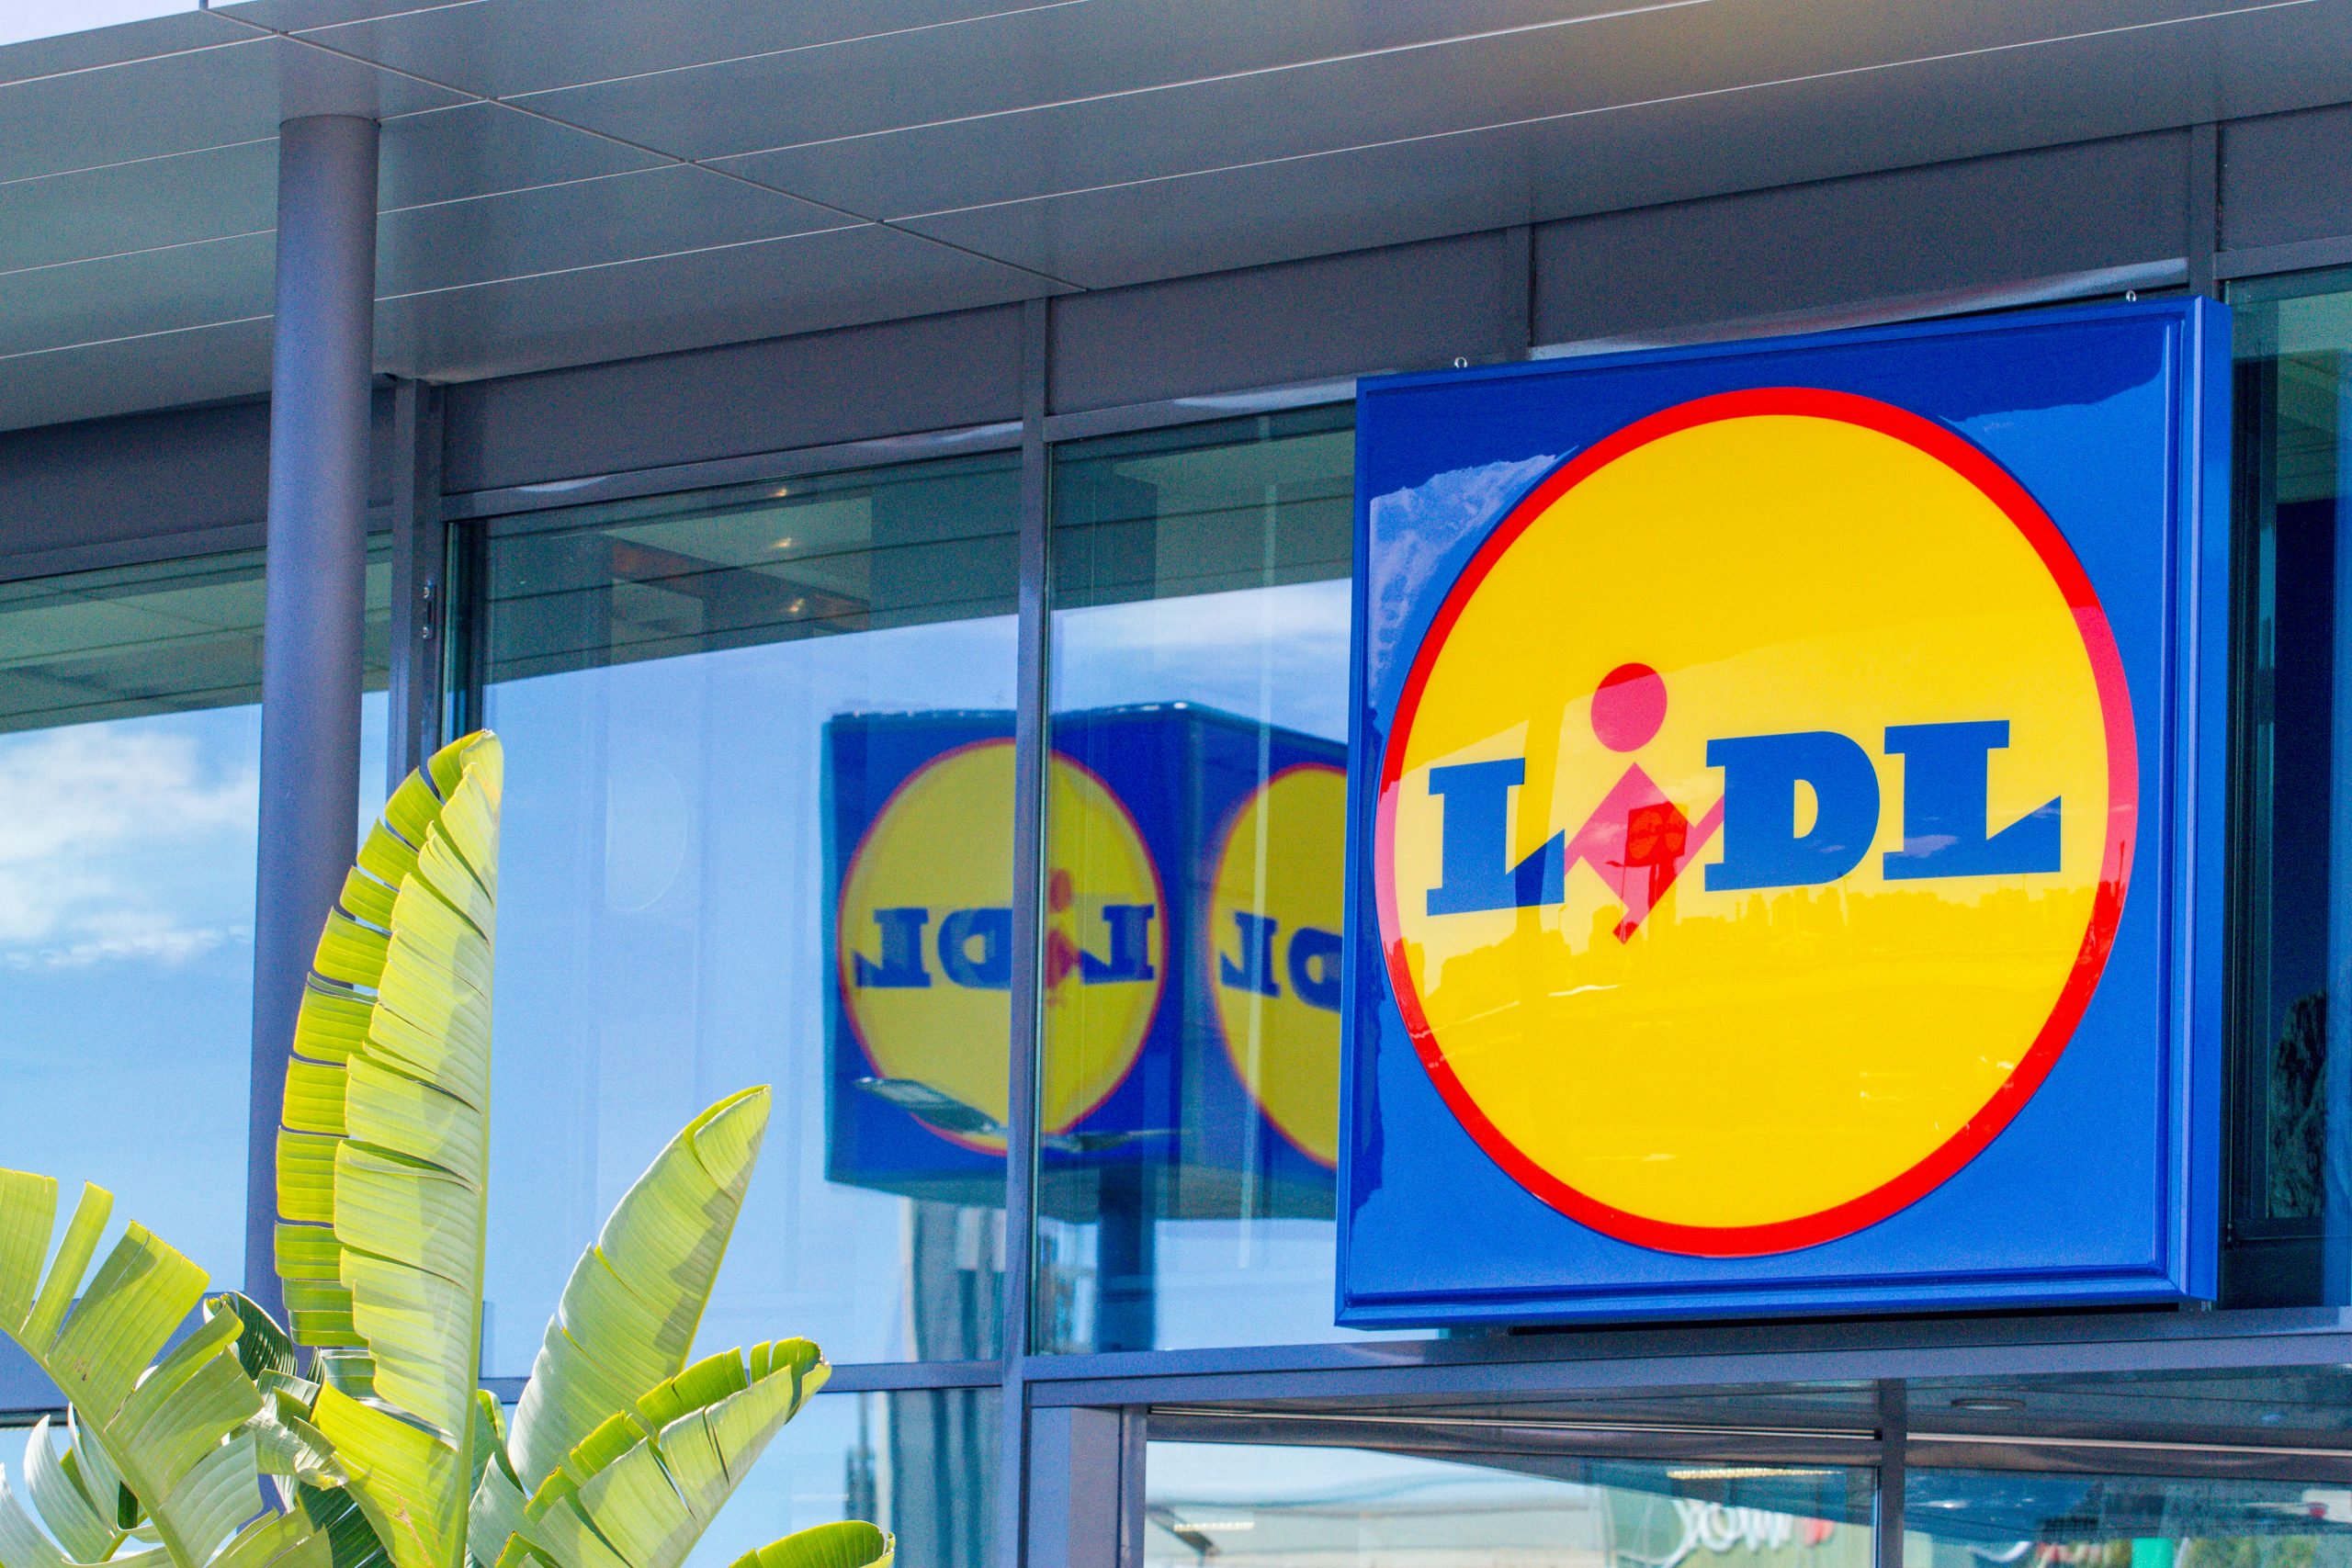 Fancy an overnight stay in Lidl? Anything can happen in this Covid world